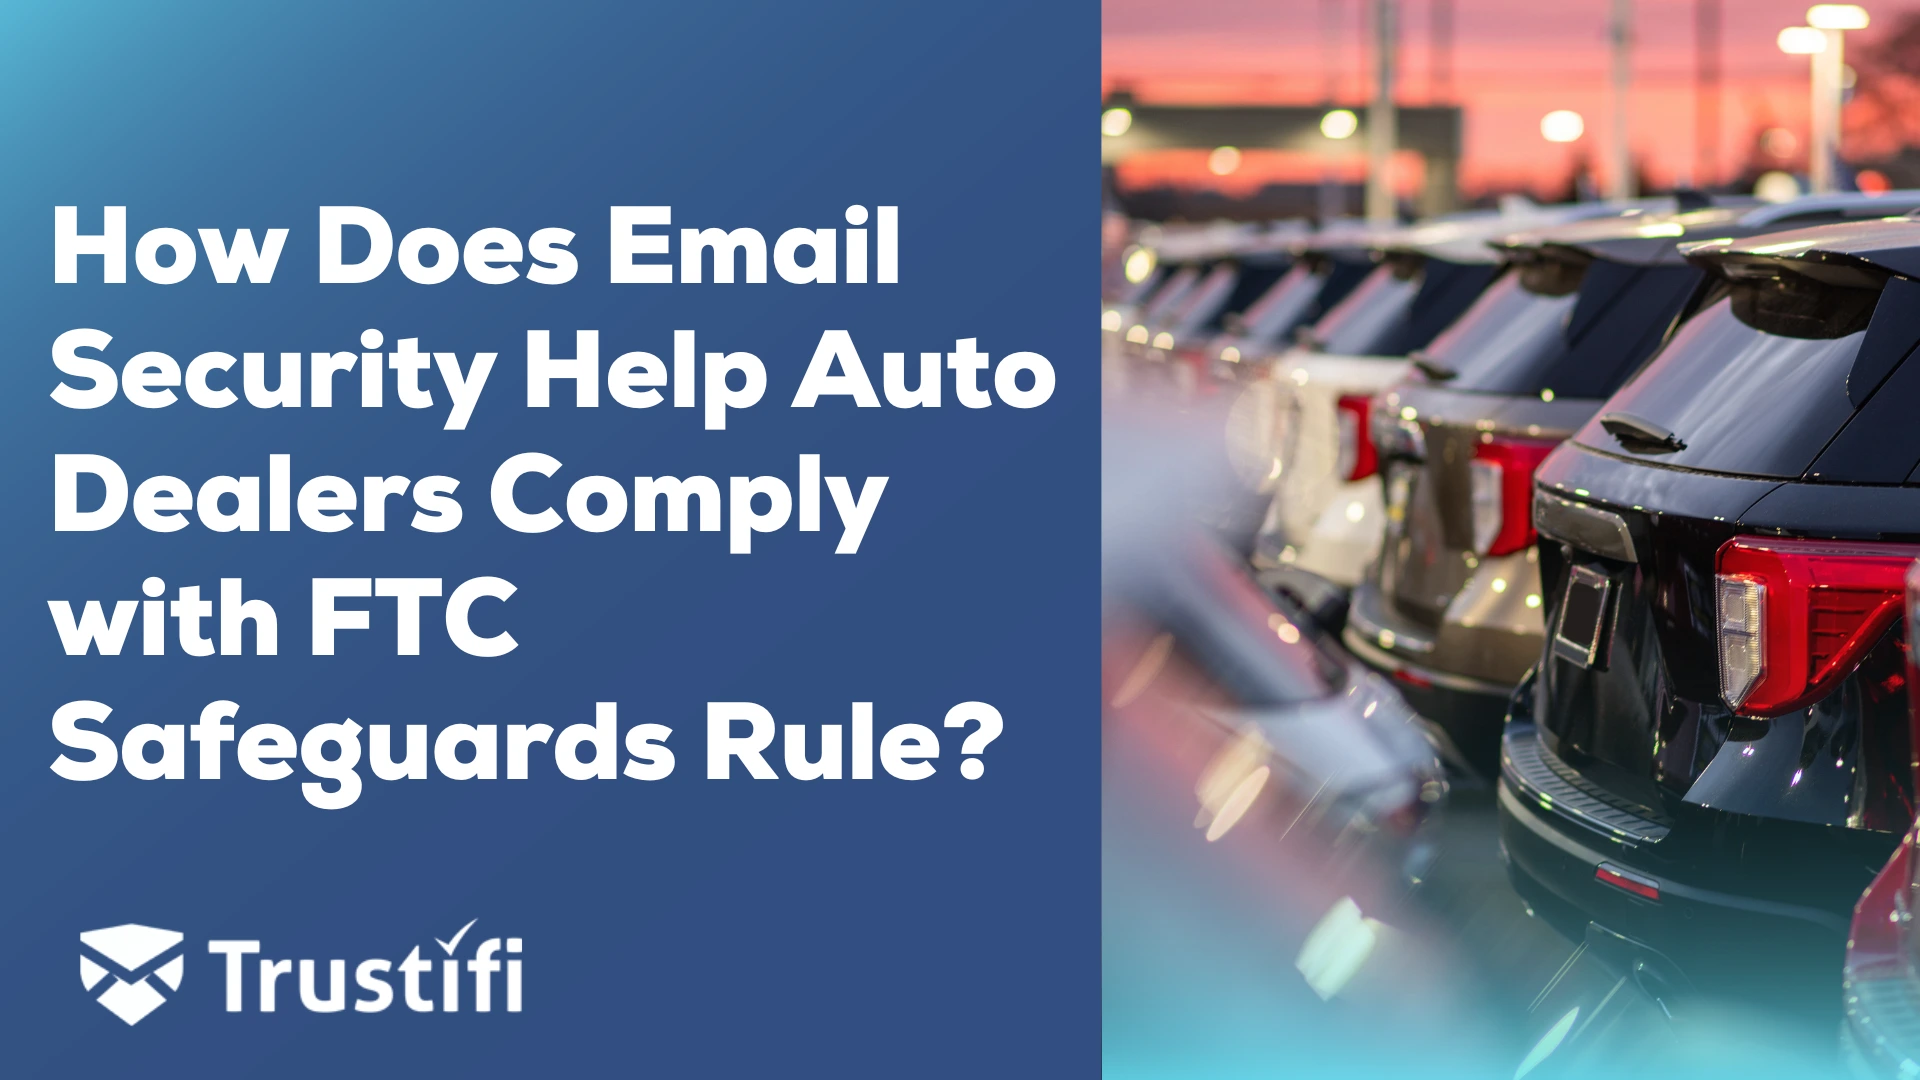 How Does Email Security Help Auto Dealers Comply with FTC Safeguards Rule?